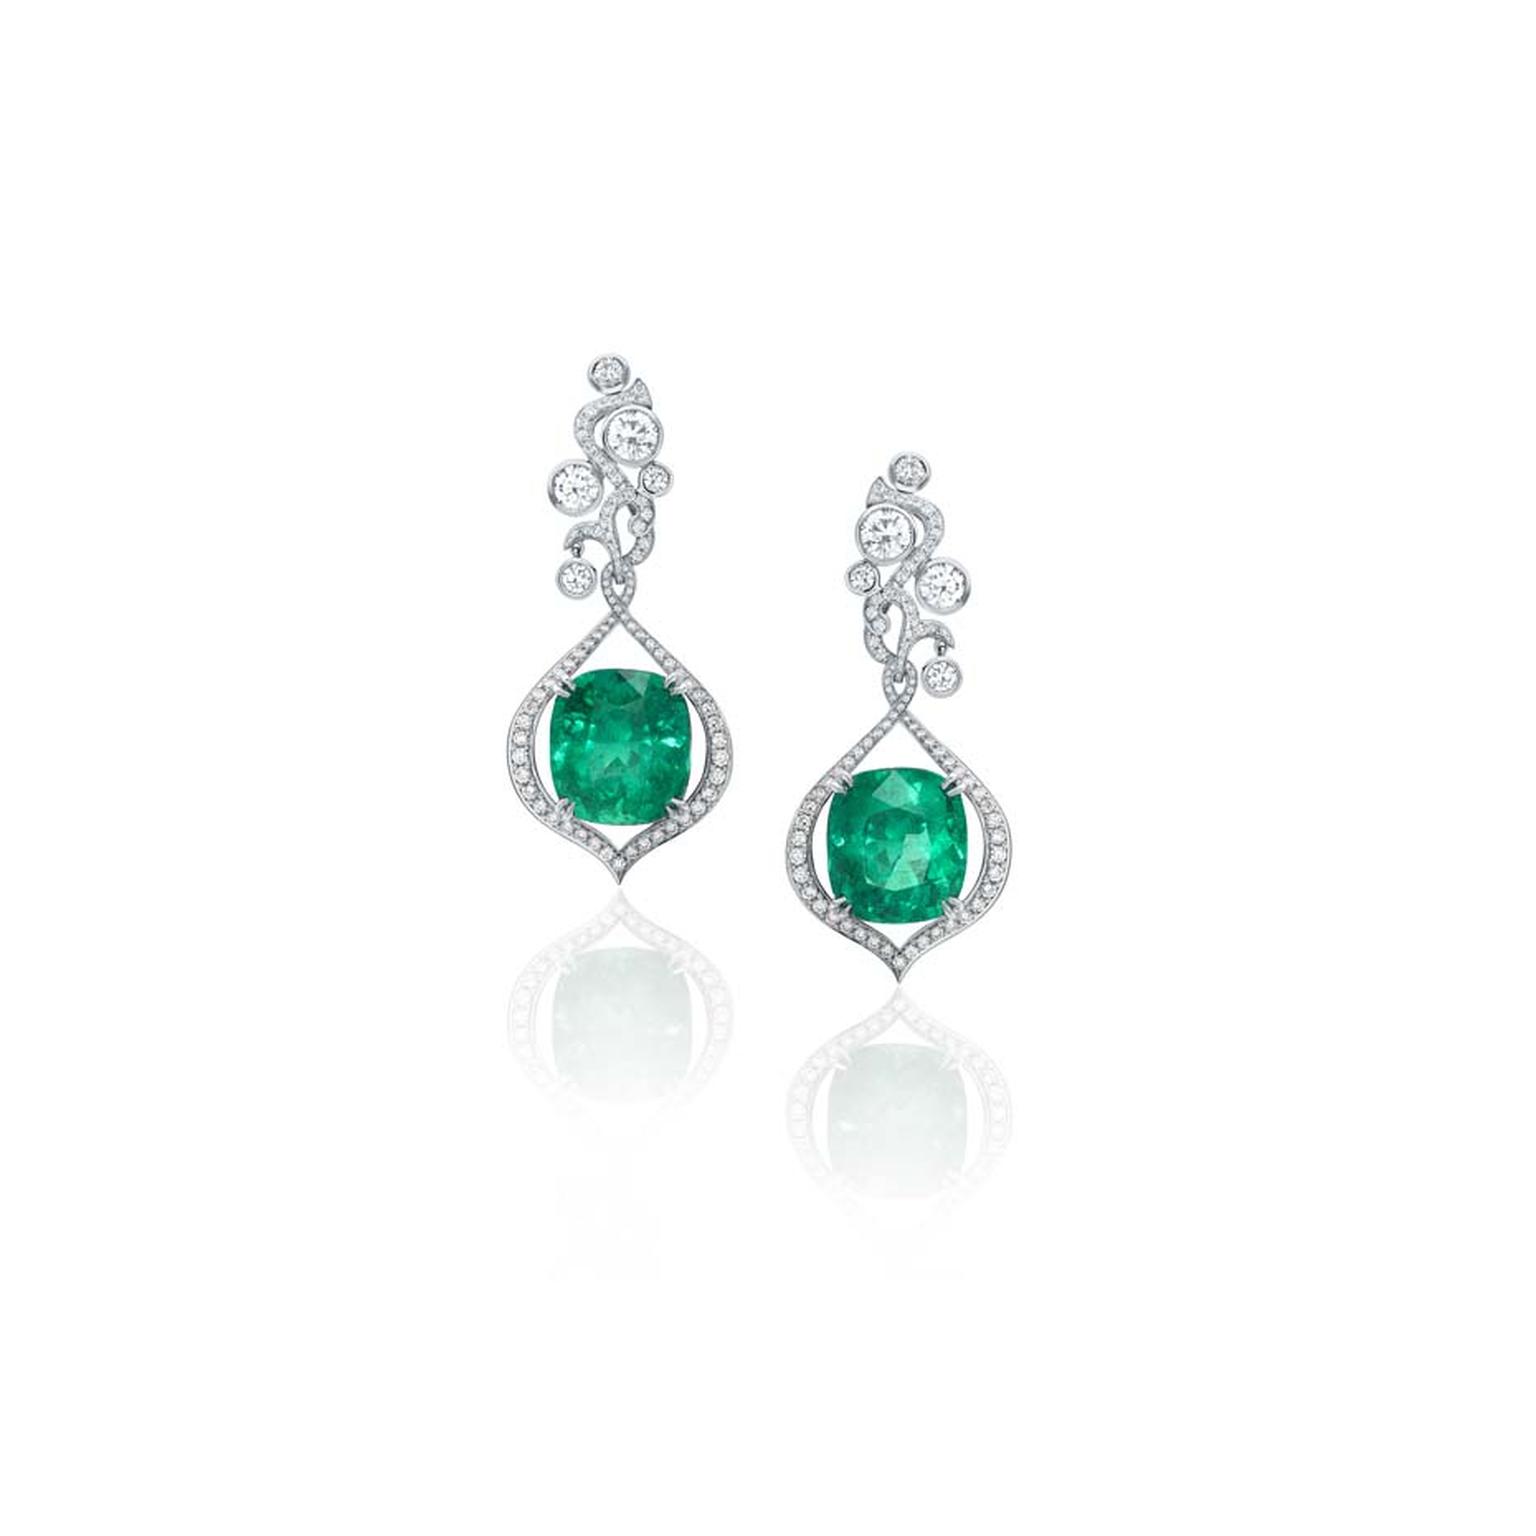 Boodles Greenfire emerald earrings featuring pave diamonds and brilliant-cut diamonds.